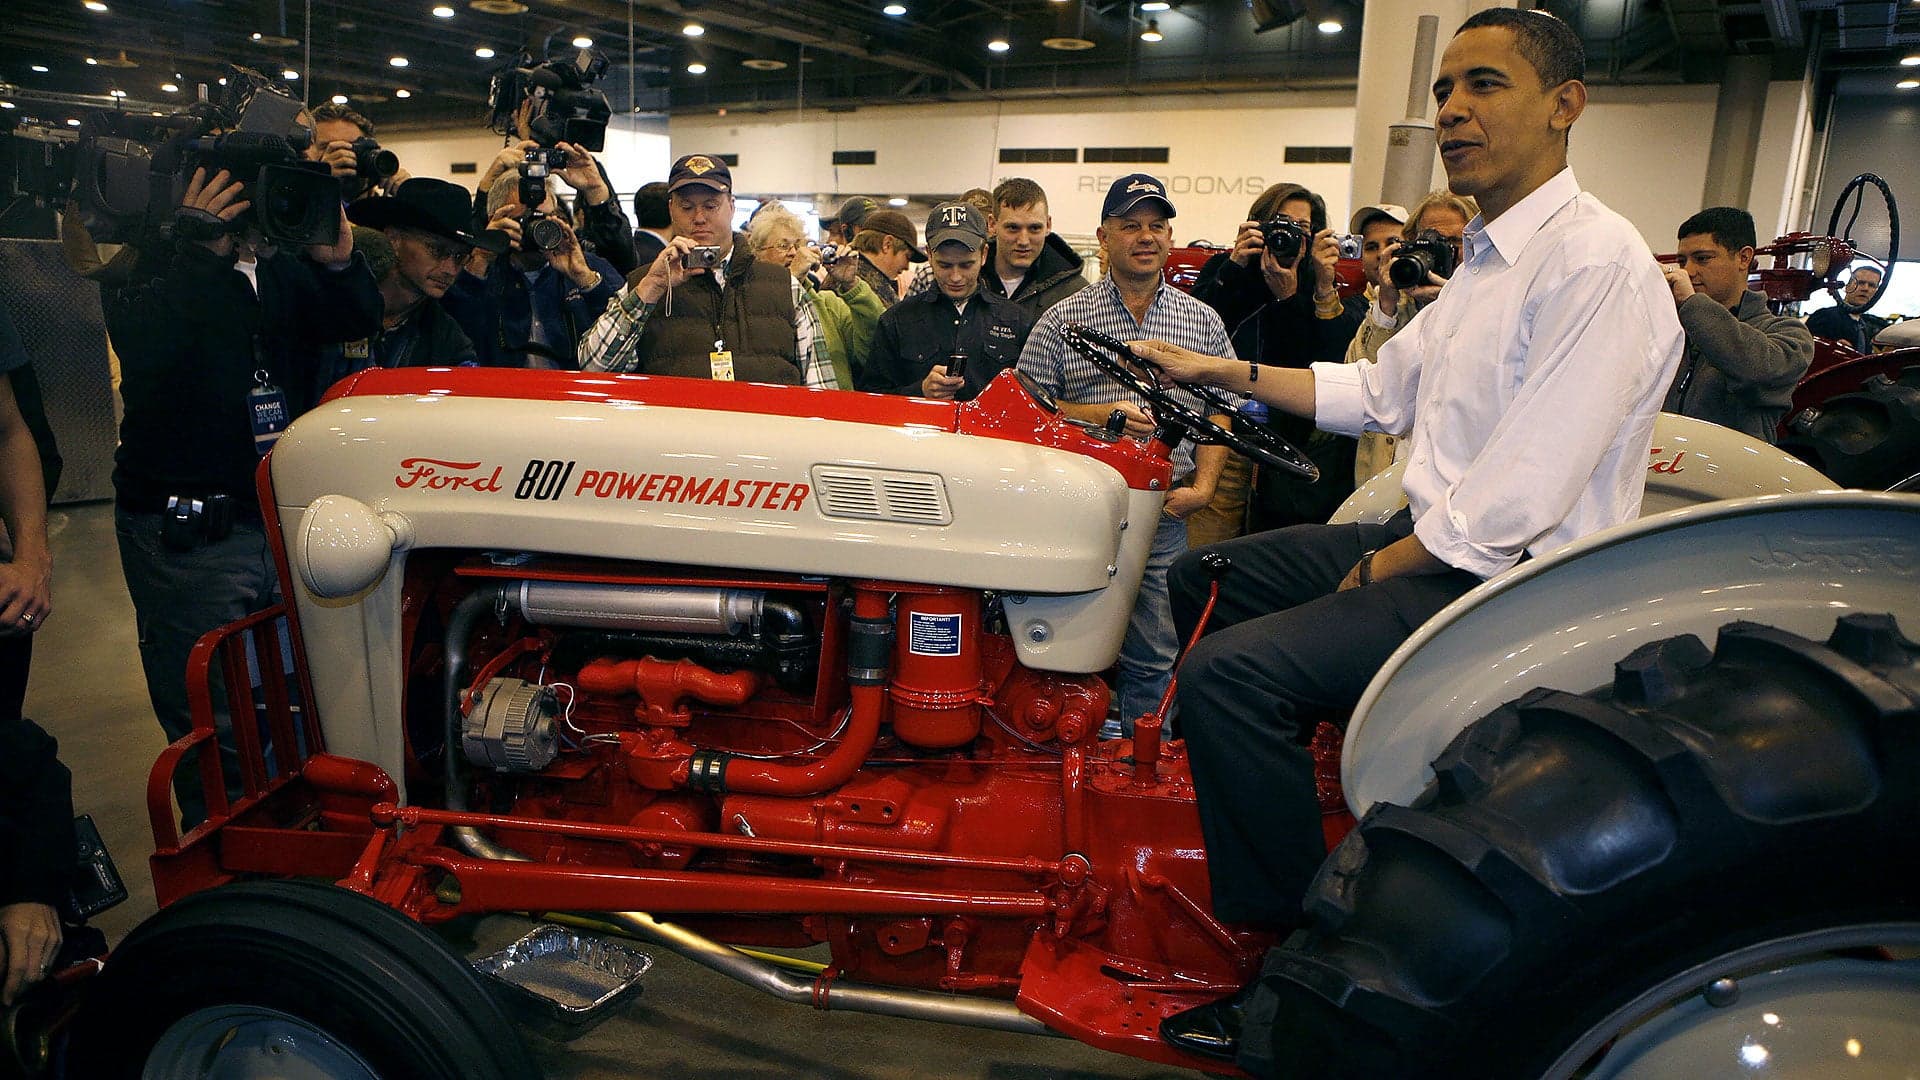 Apropos of the Iowa Caucus, Presidential Candidates Riding Tractors